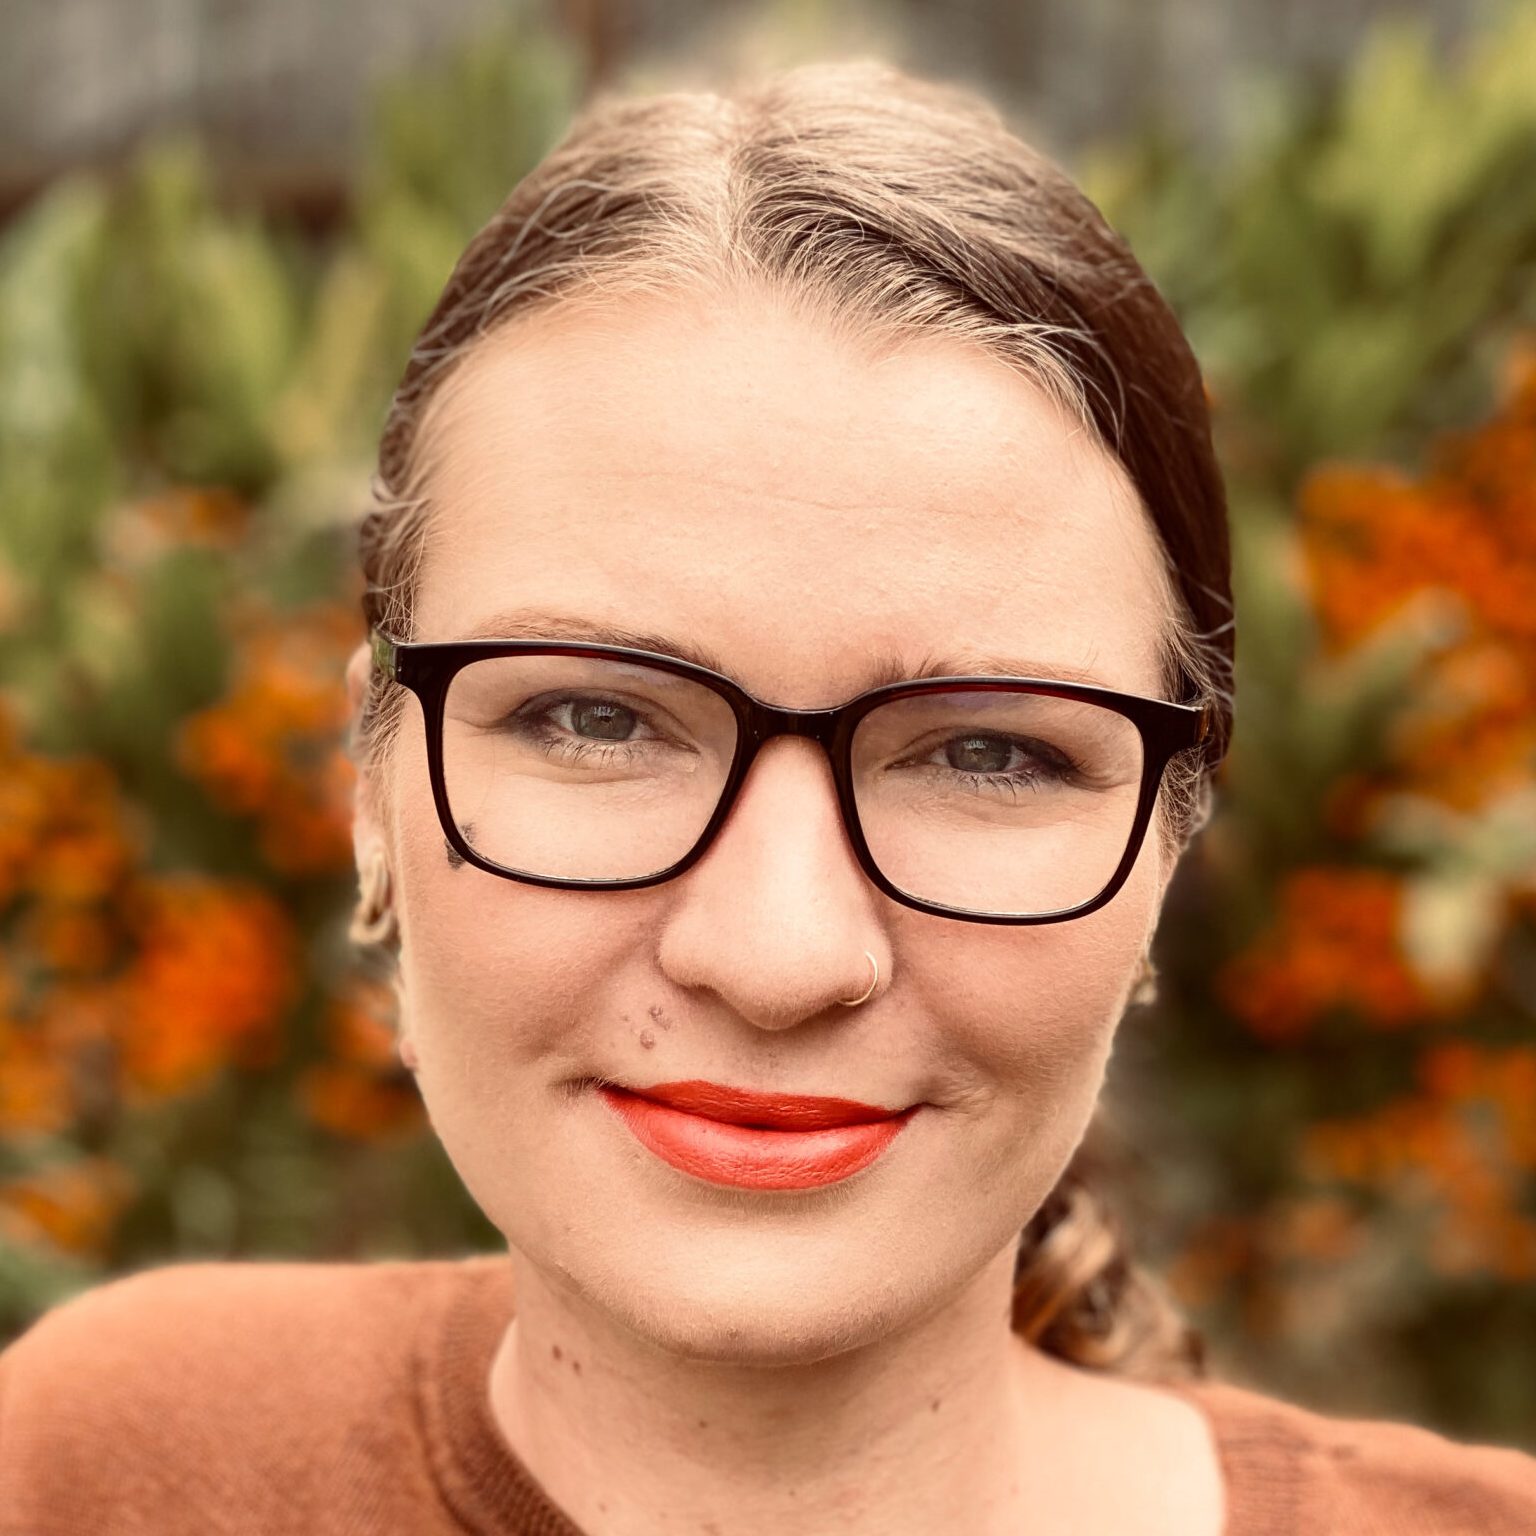 Headshot of Megan Sullivan-Tuba, a white woman with glasses and brown hair pulled back. Individual and couples therapy, LGBTQ+ allied.